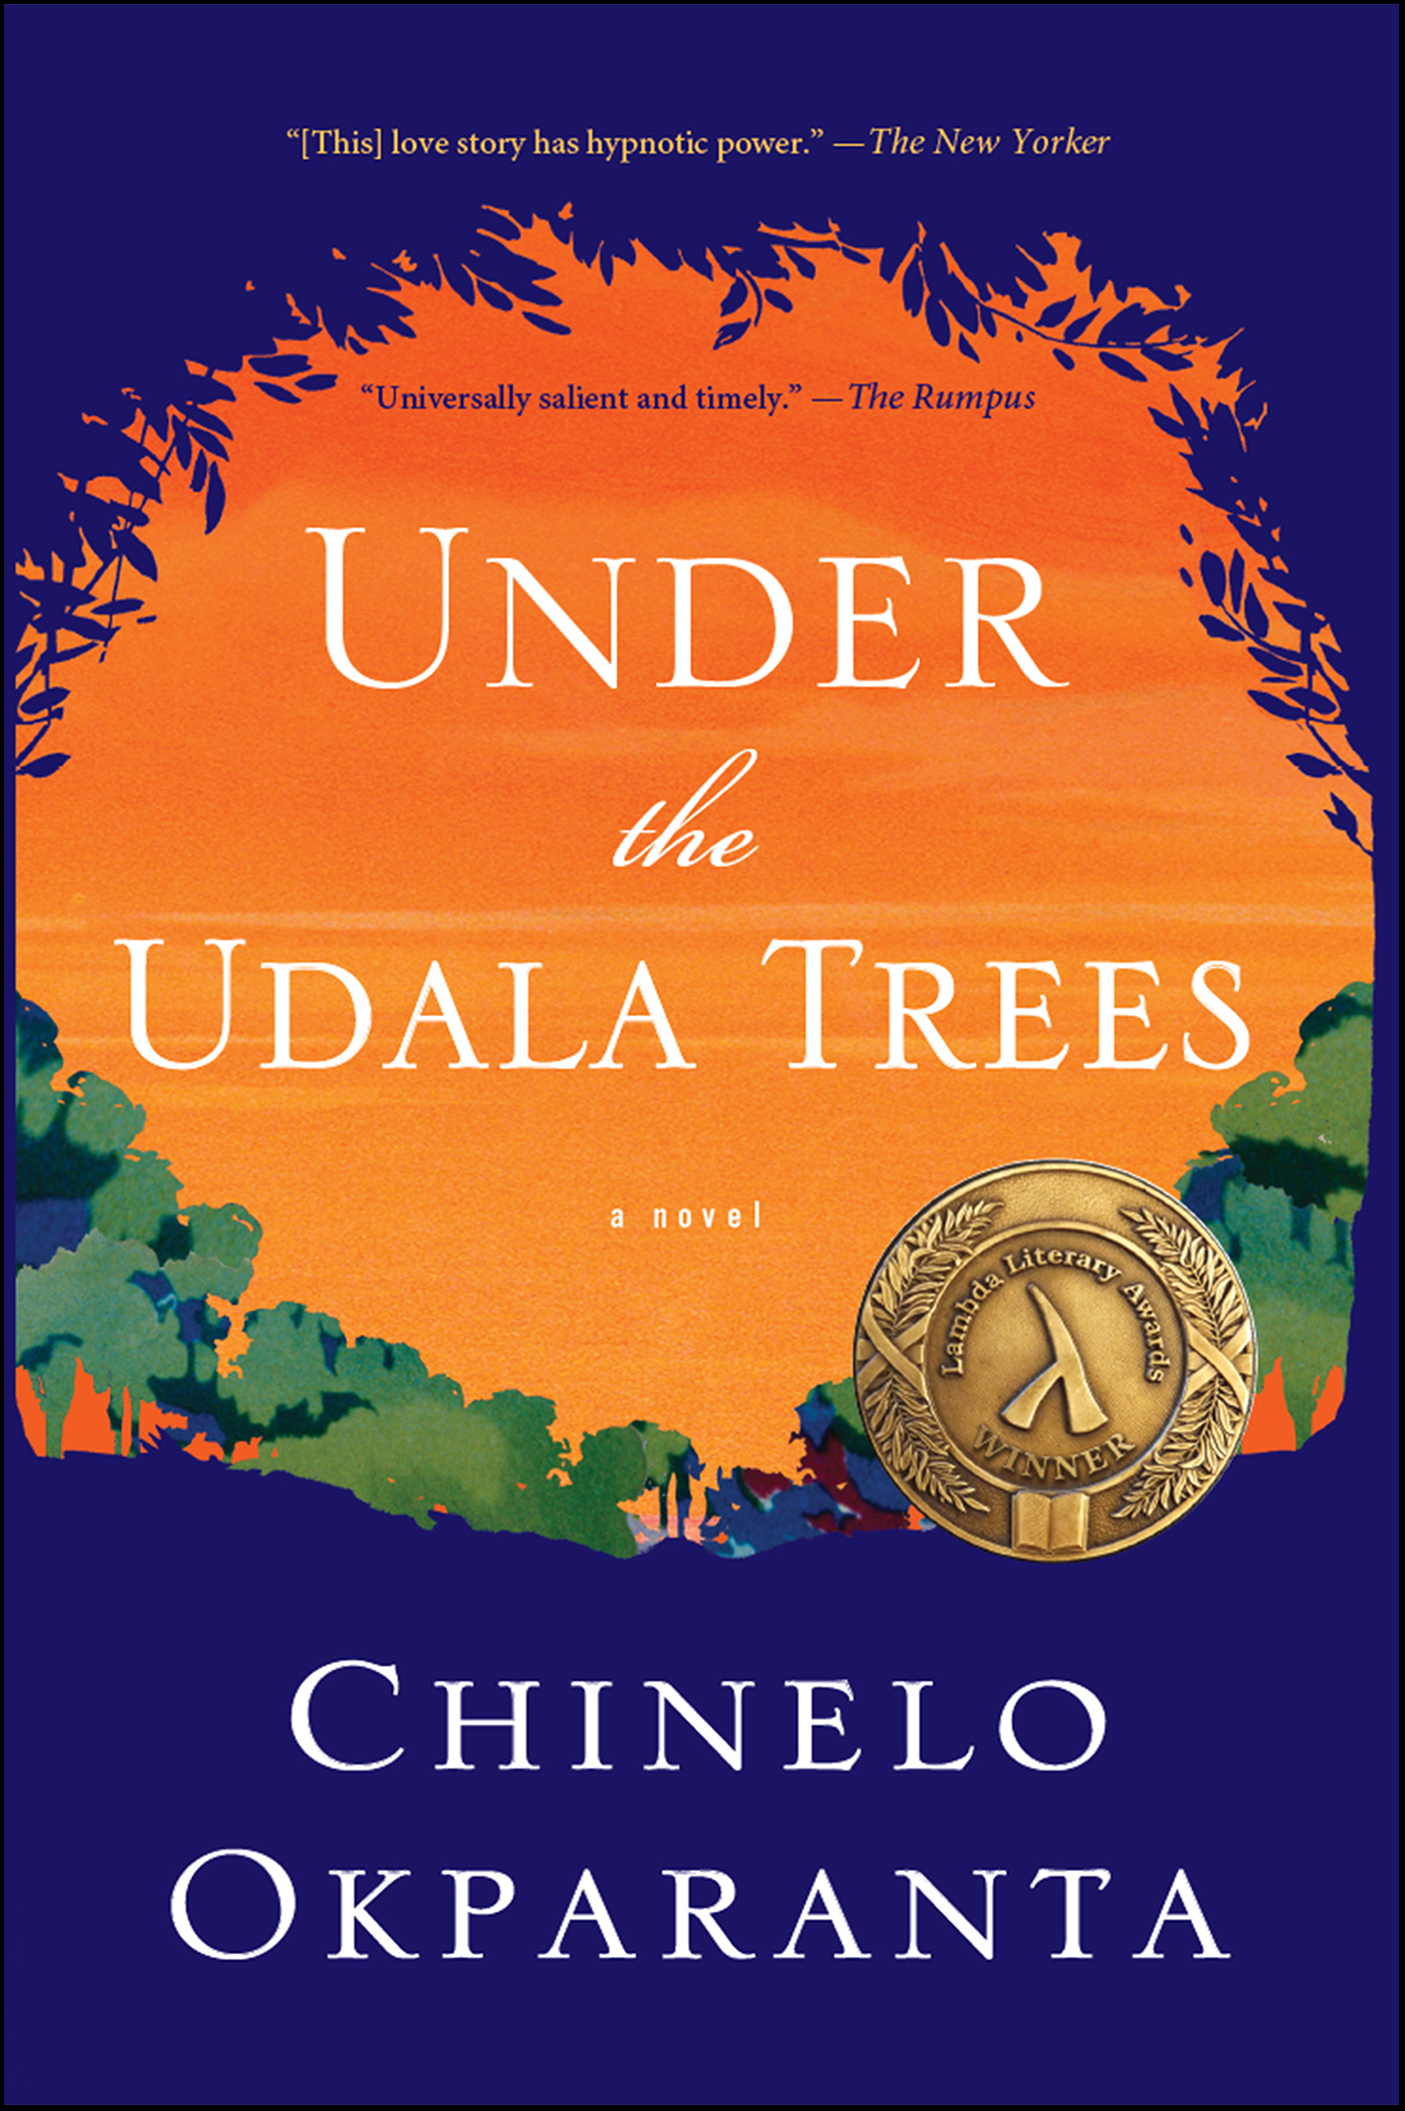 Under the udala trees cover image